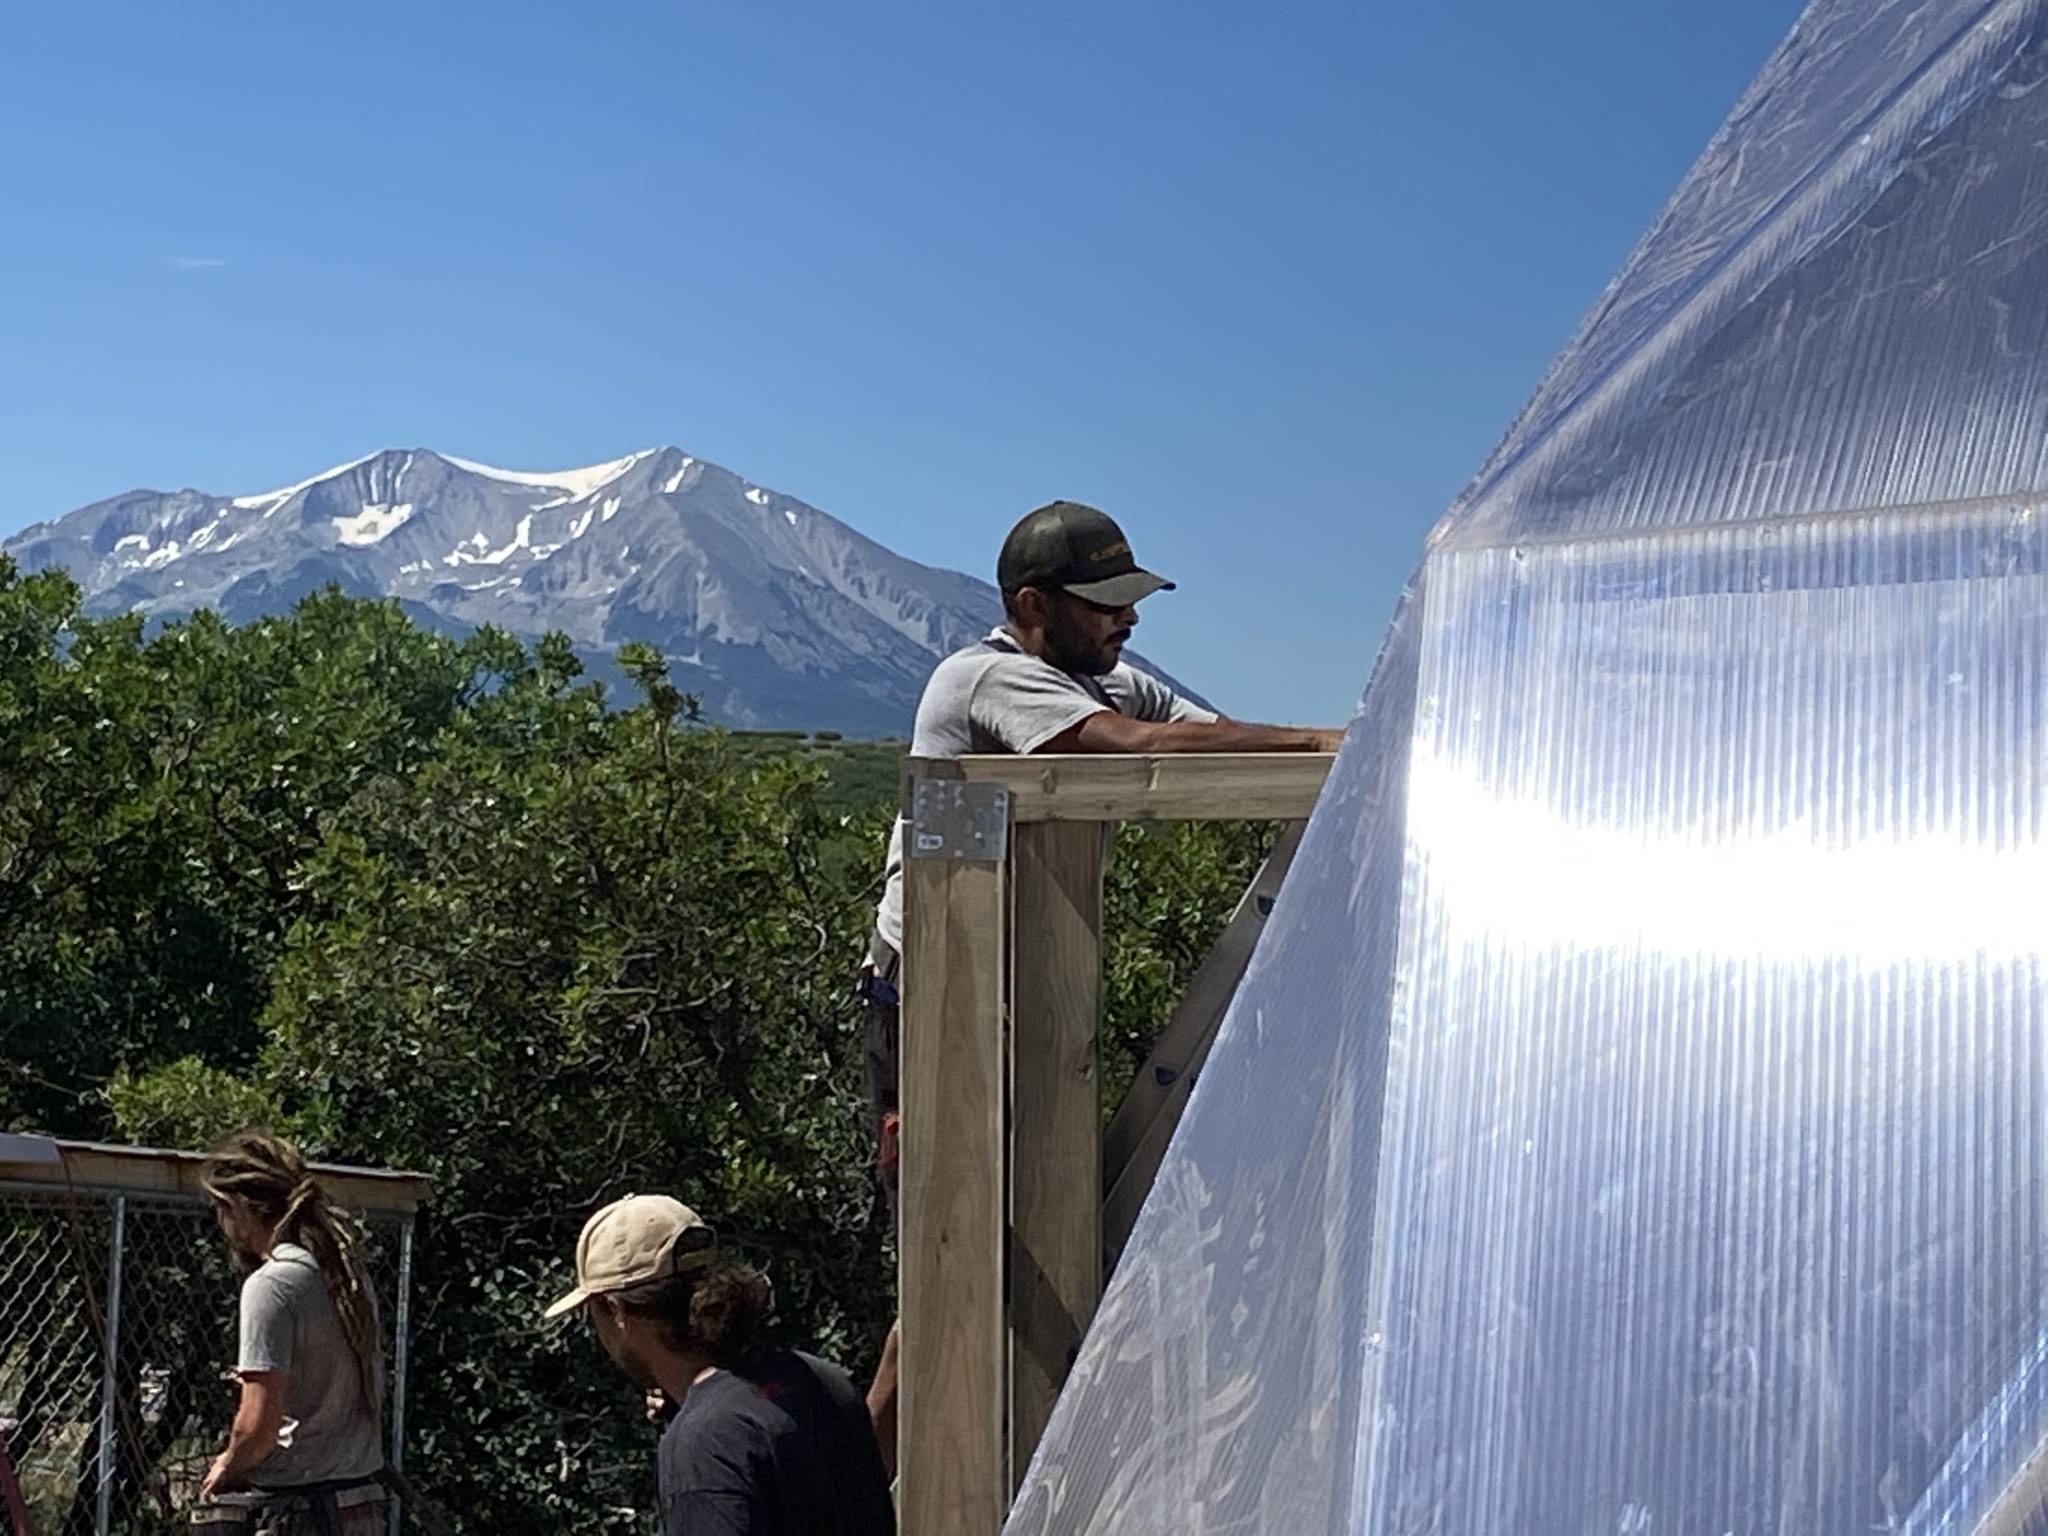 New 33' Growing Dome being built in Carbondale, with view of Mt. Sopris